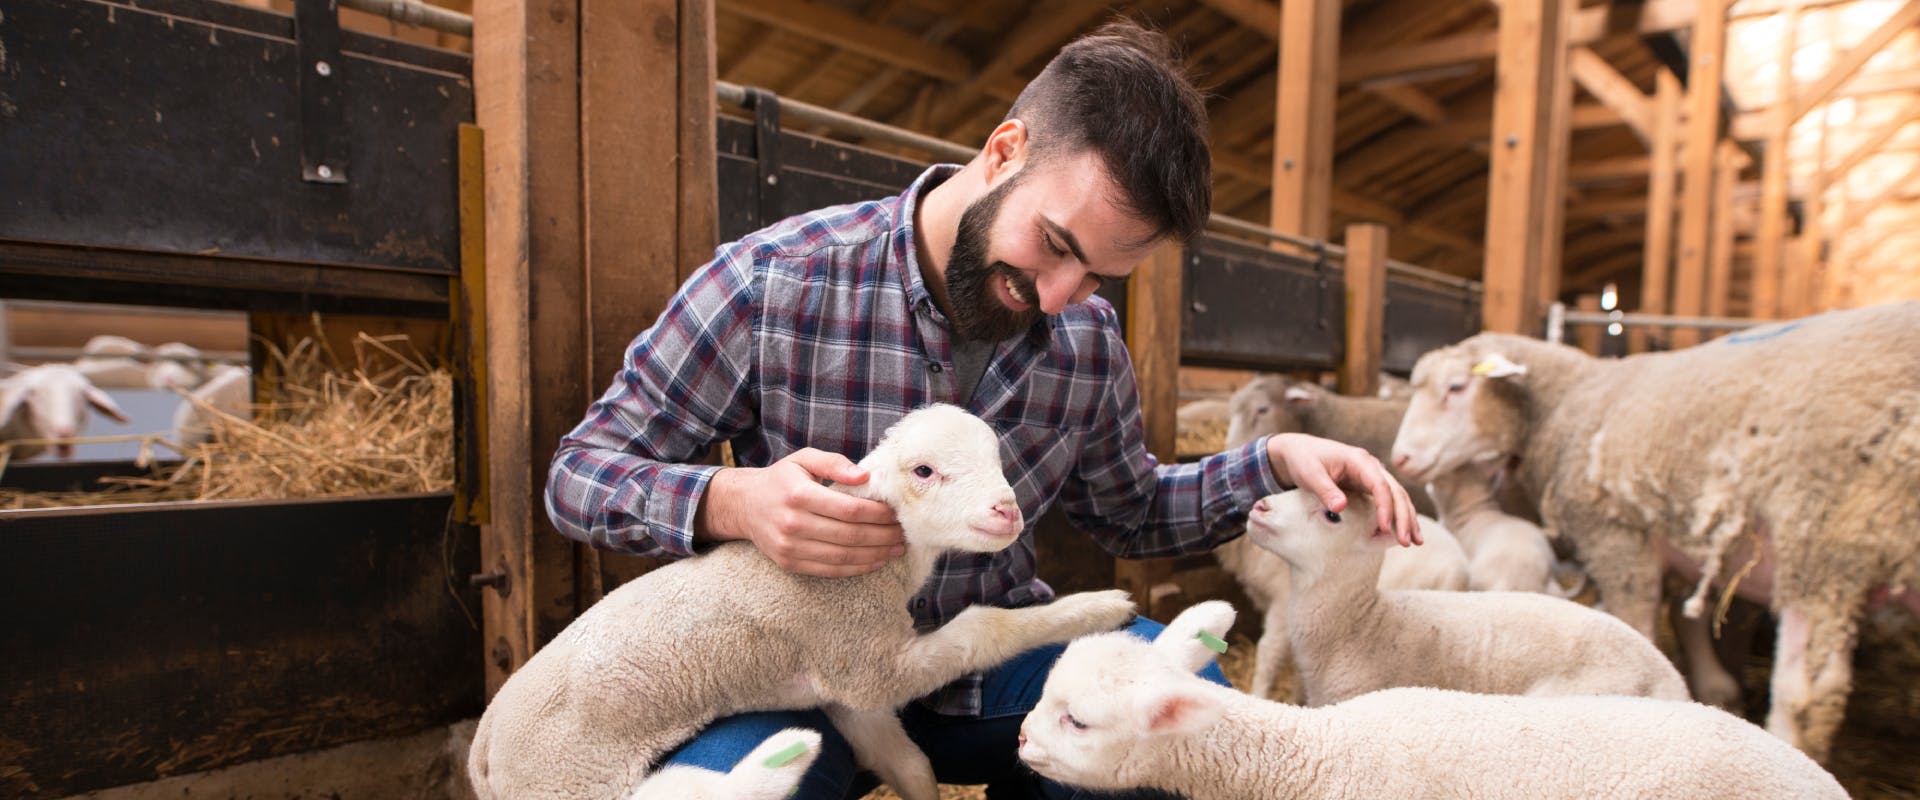 a man pet sitting farm animals in a pen with lots of lambs